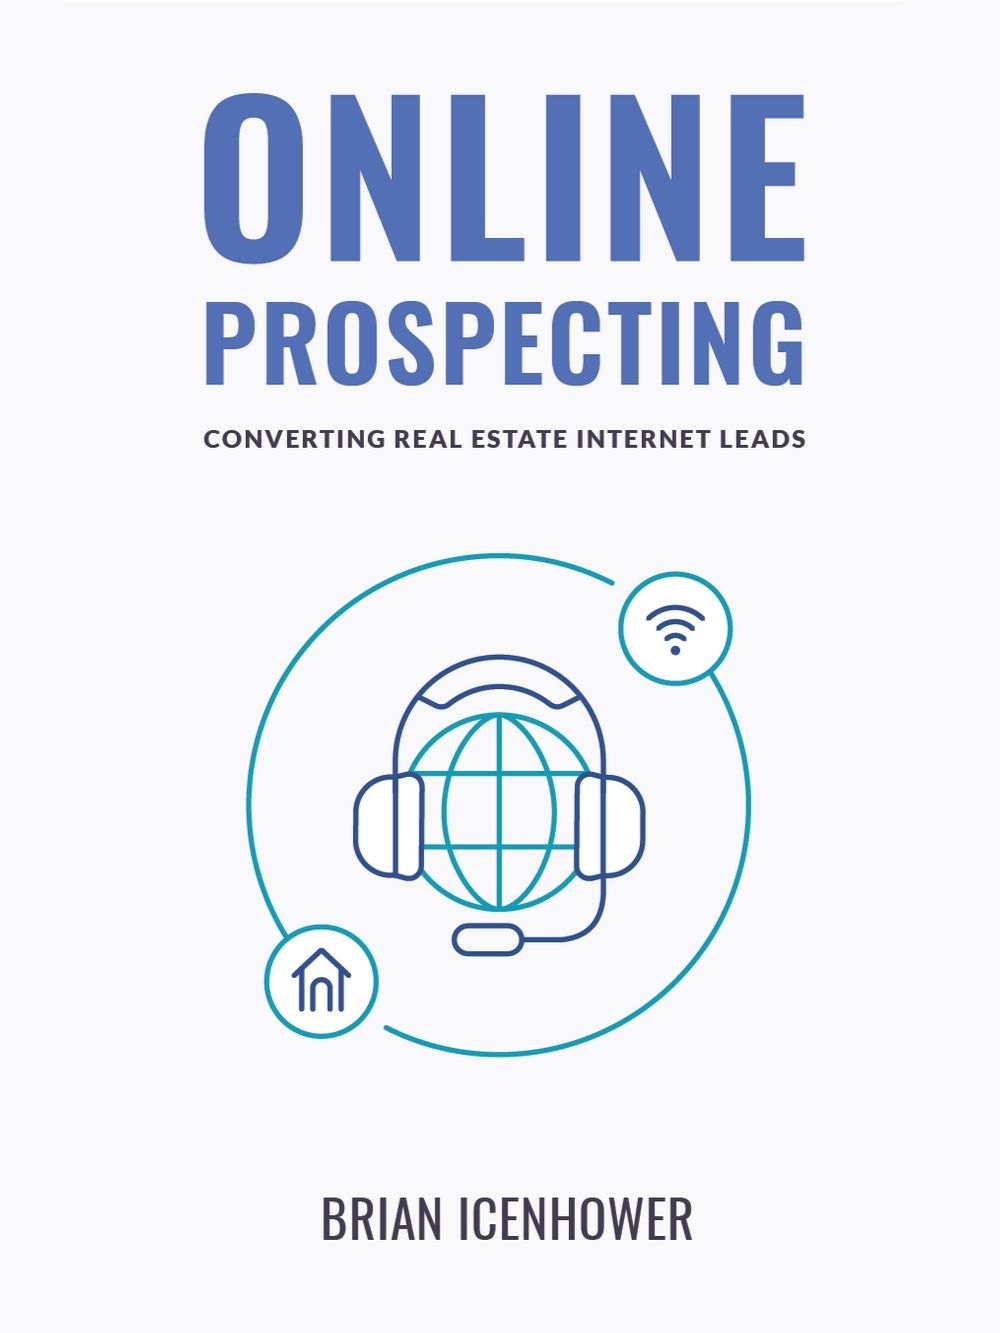 ONLINE PROSPECTING: Converting Real Estate Internet Leads